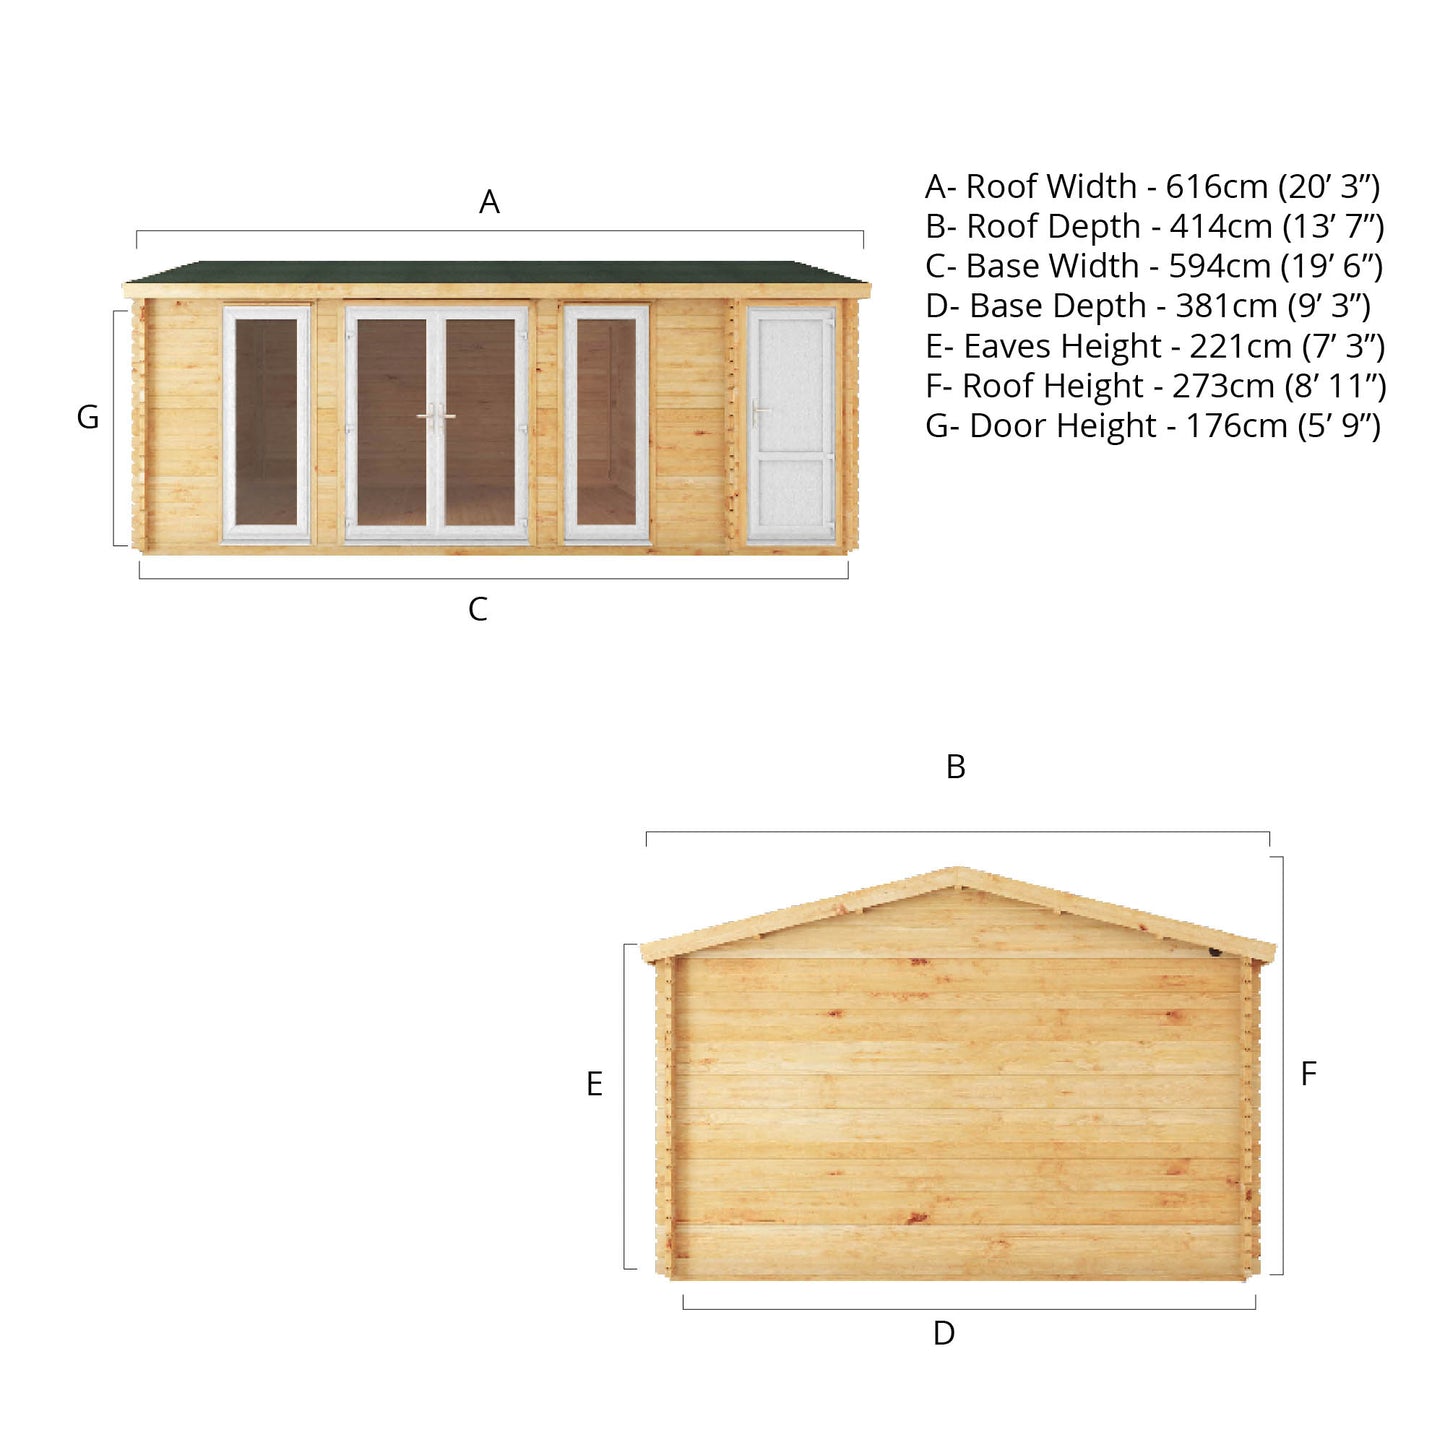 The 6.1m x 4m Dove Log Cabin with Side Shed and White UPVC